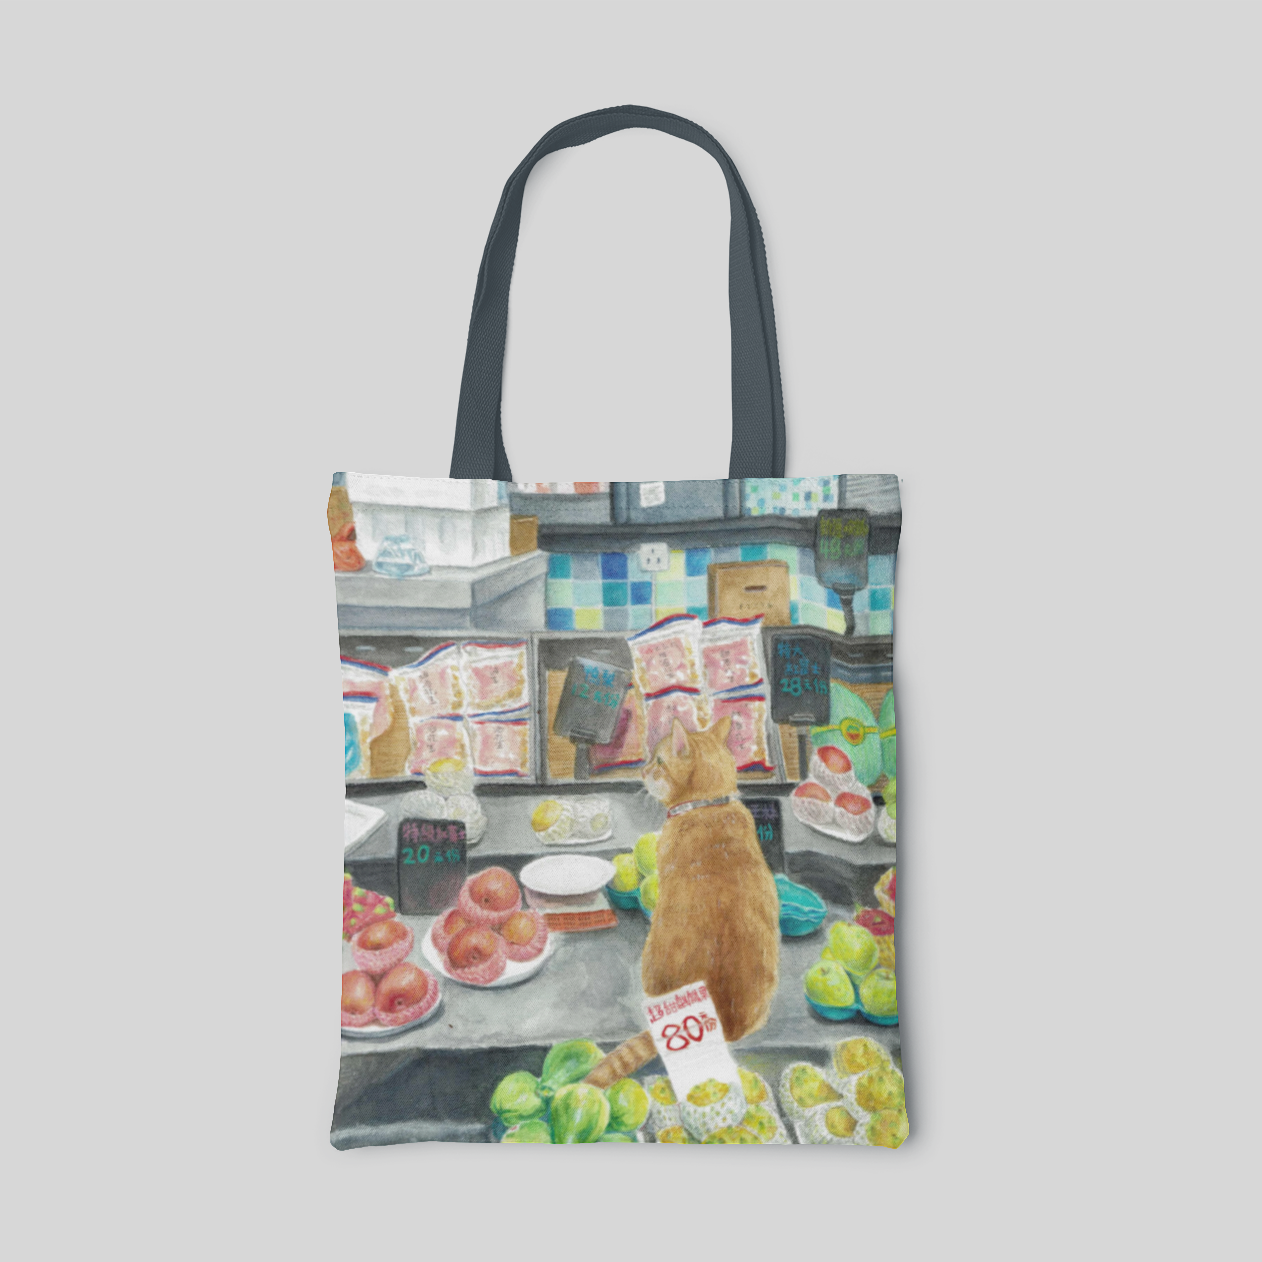 Wet market cat themed tote bag with inner pockets